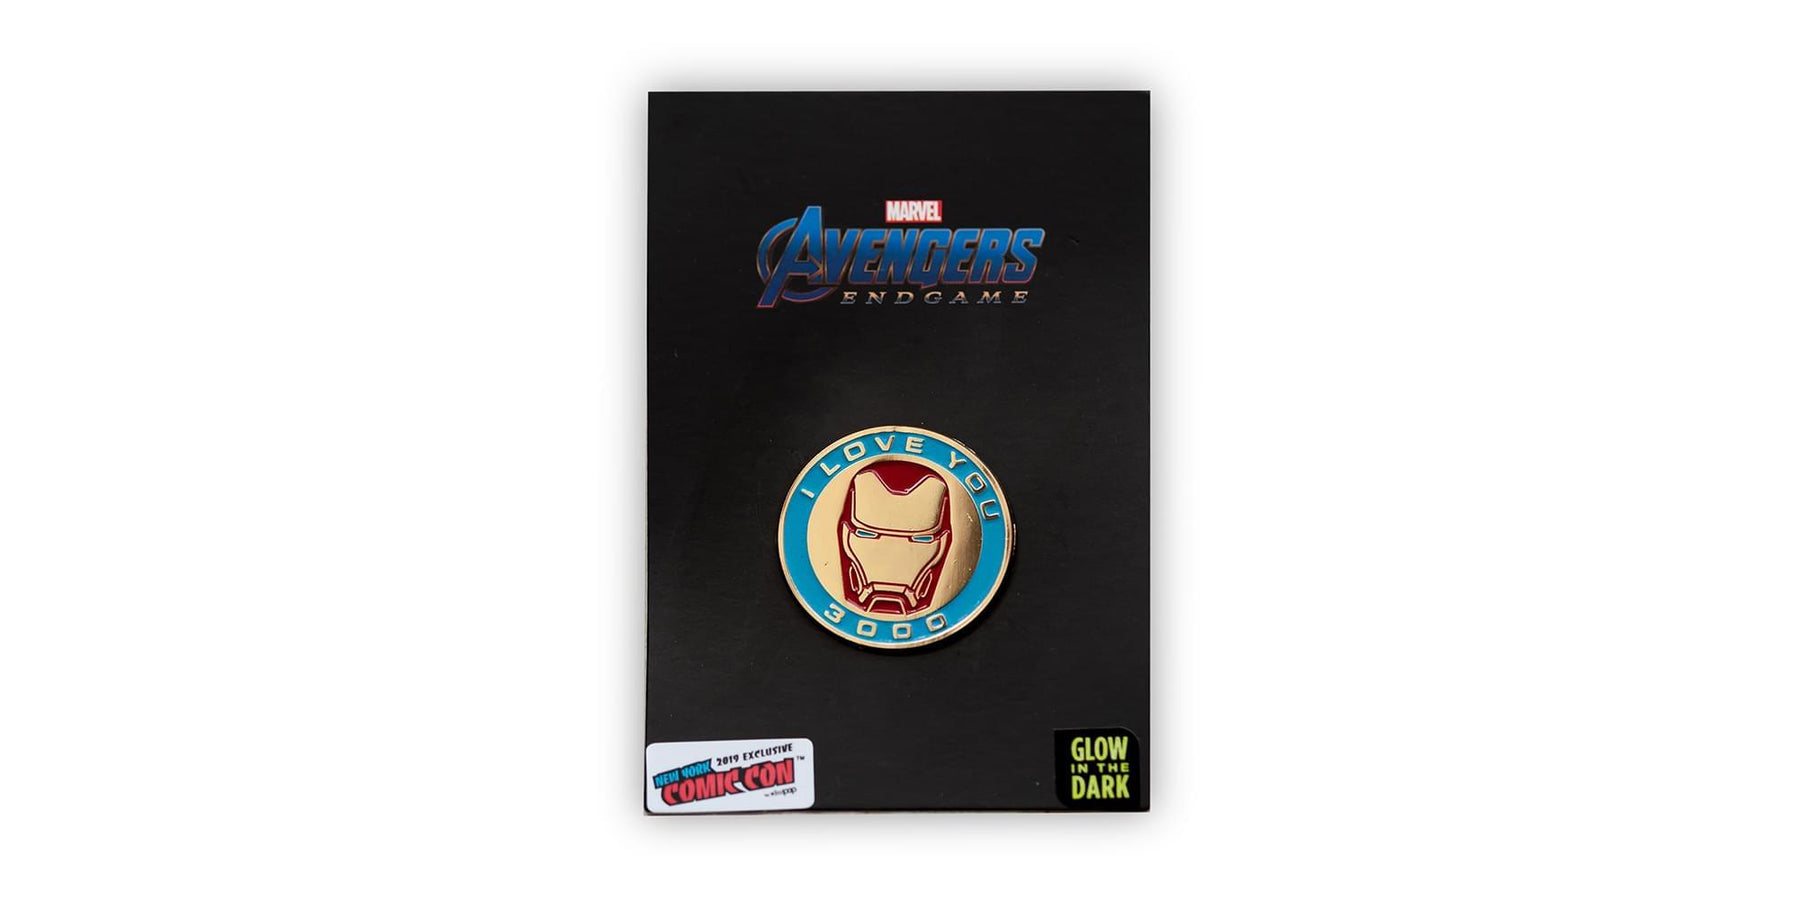 Marvel Avengers: Endgame Iron Man Exclusive Collector Pin | "I Love You 3000"